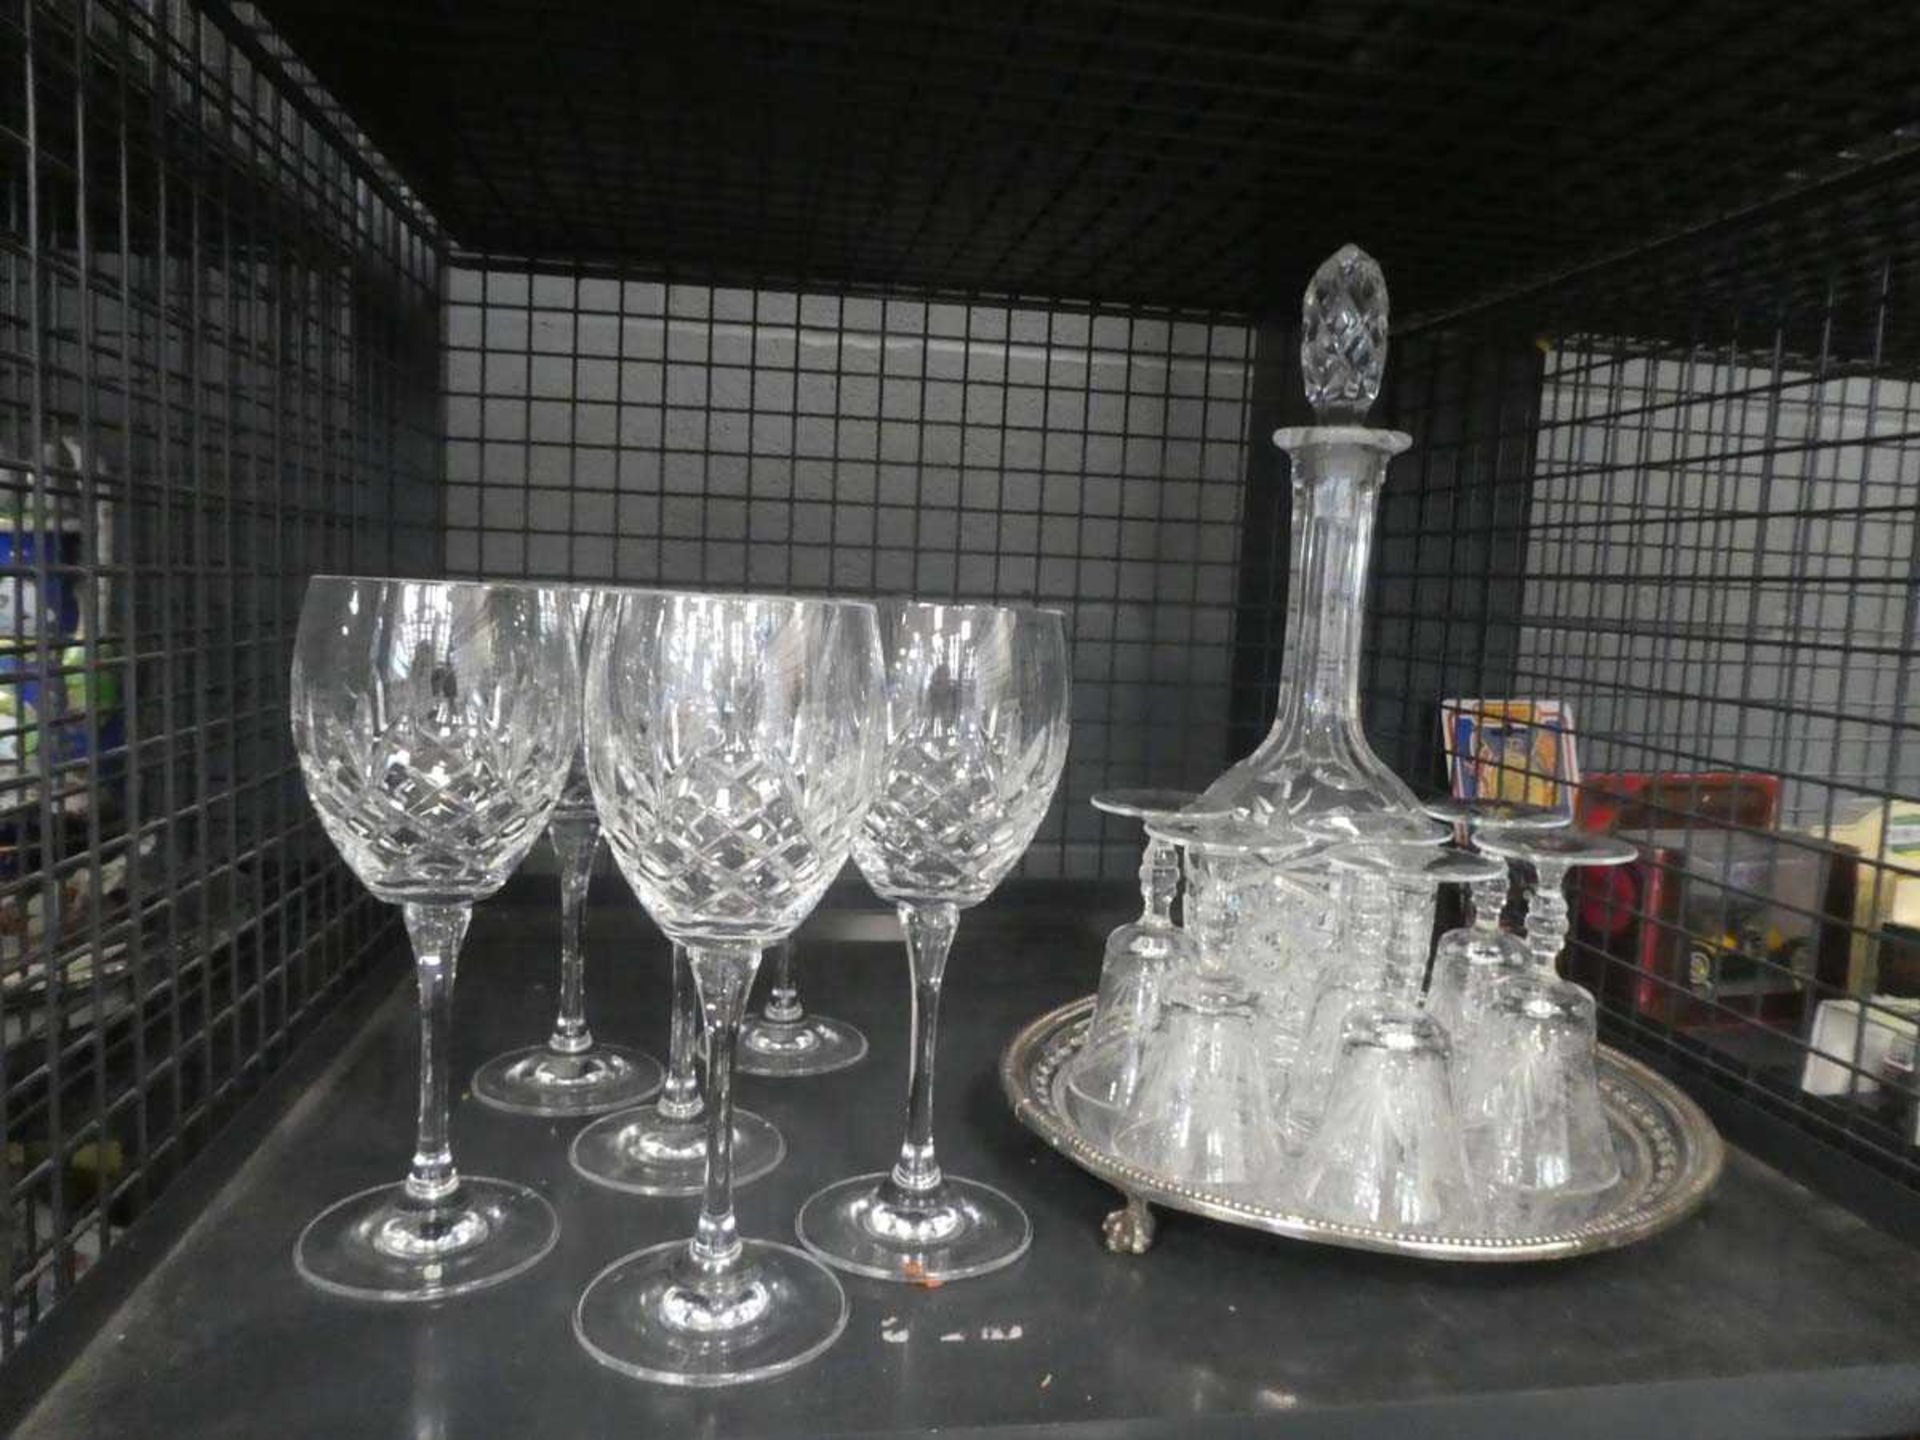 Cage containing a silver plated serving tray plus a decanter, sherry and wine glasses